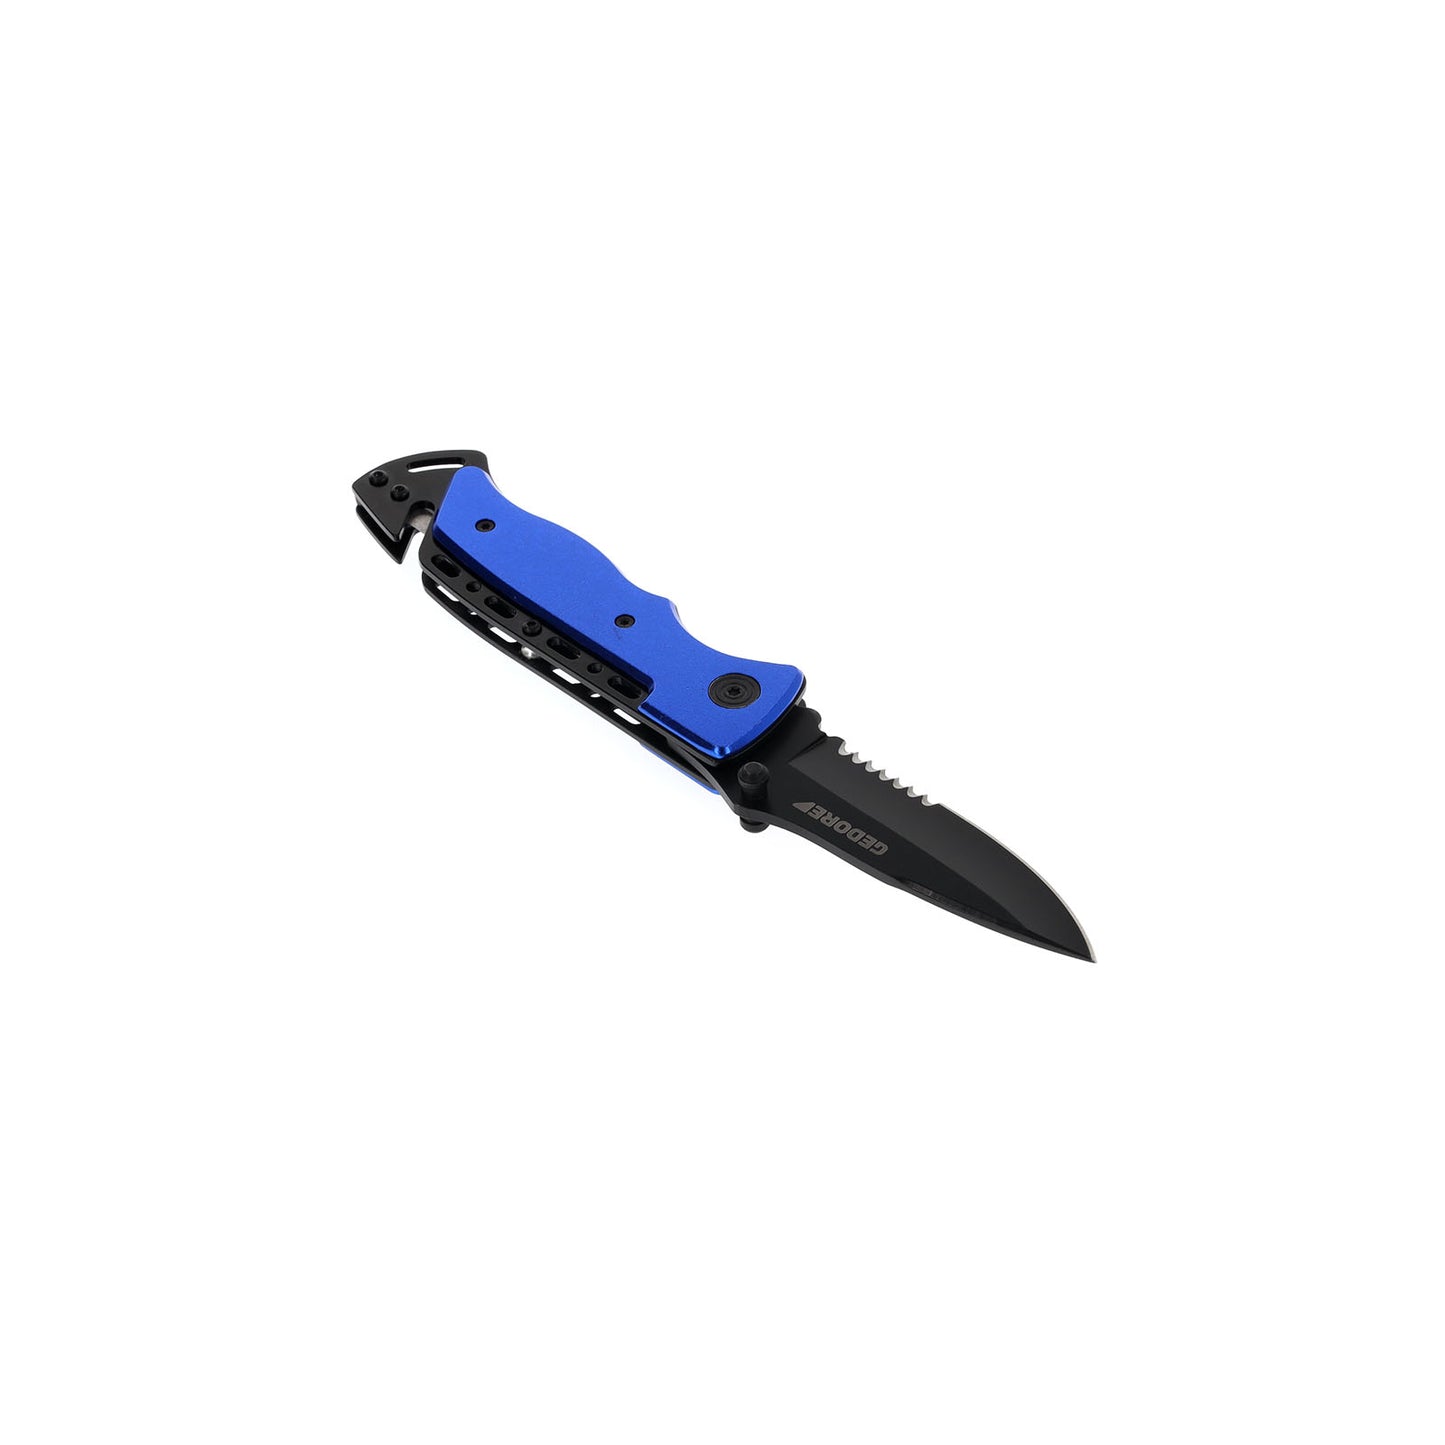 GEDORE SB 6952-00 - Rescue Knife (3100464)